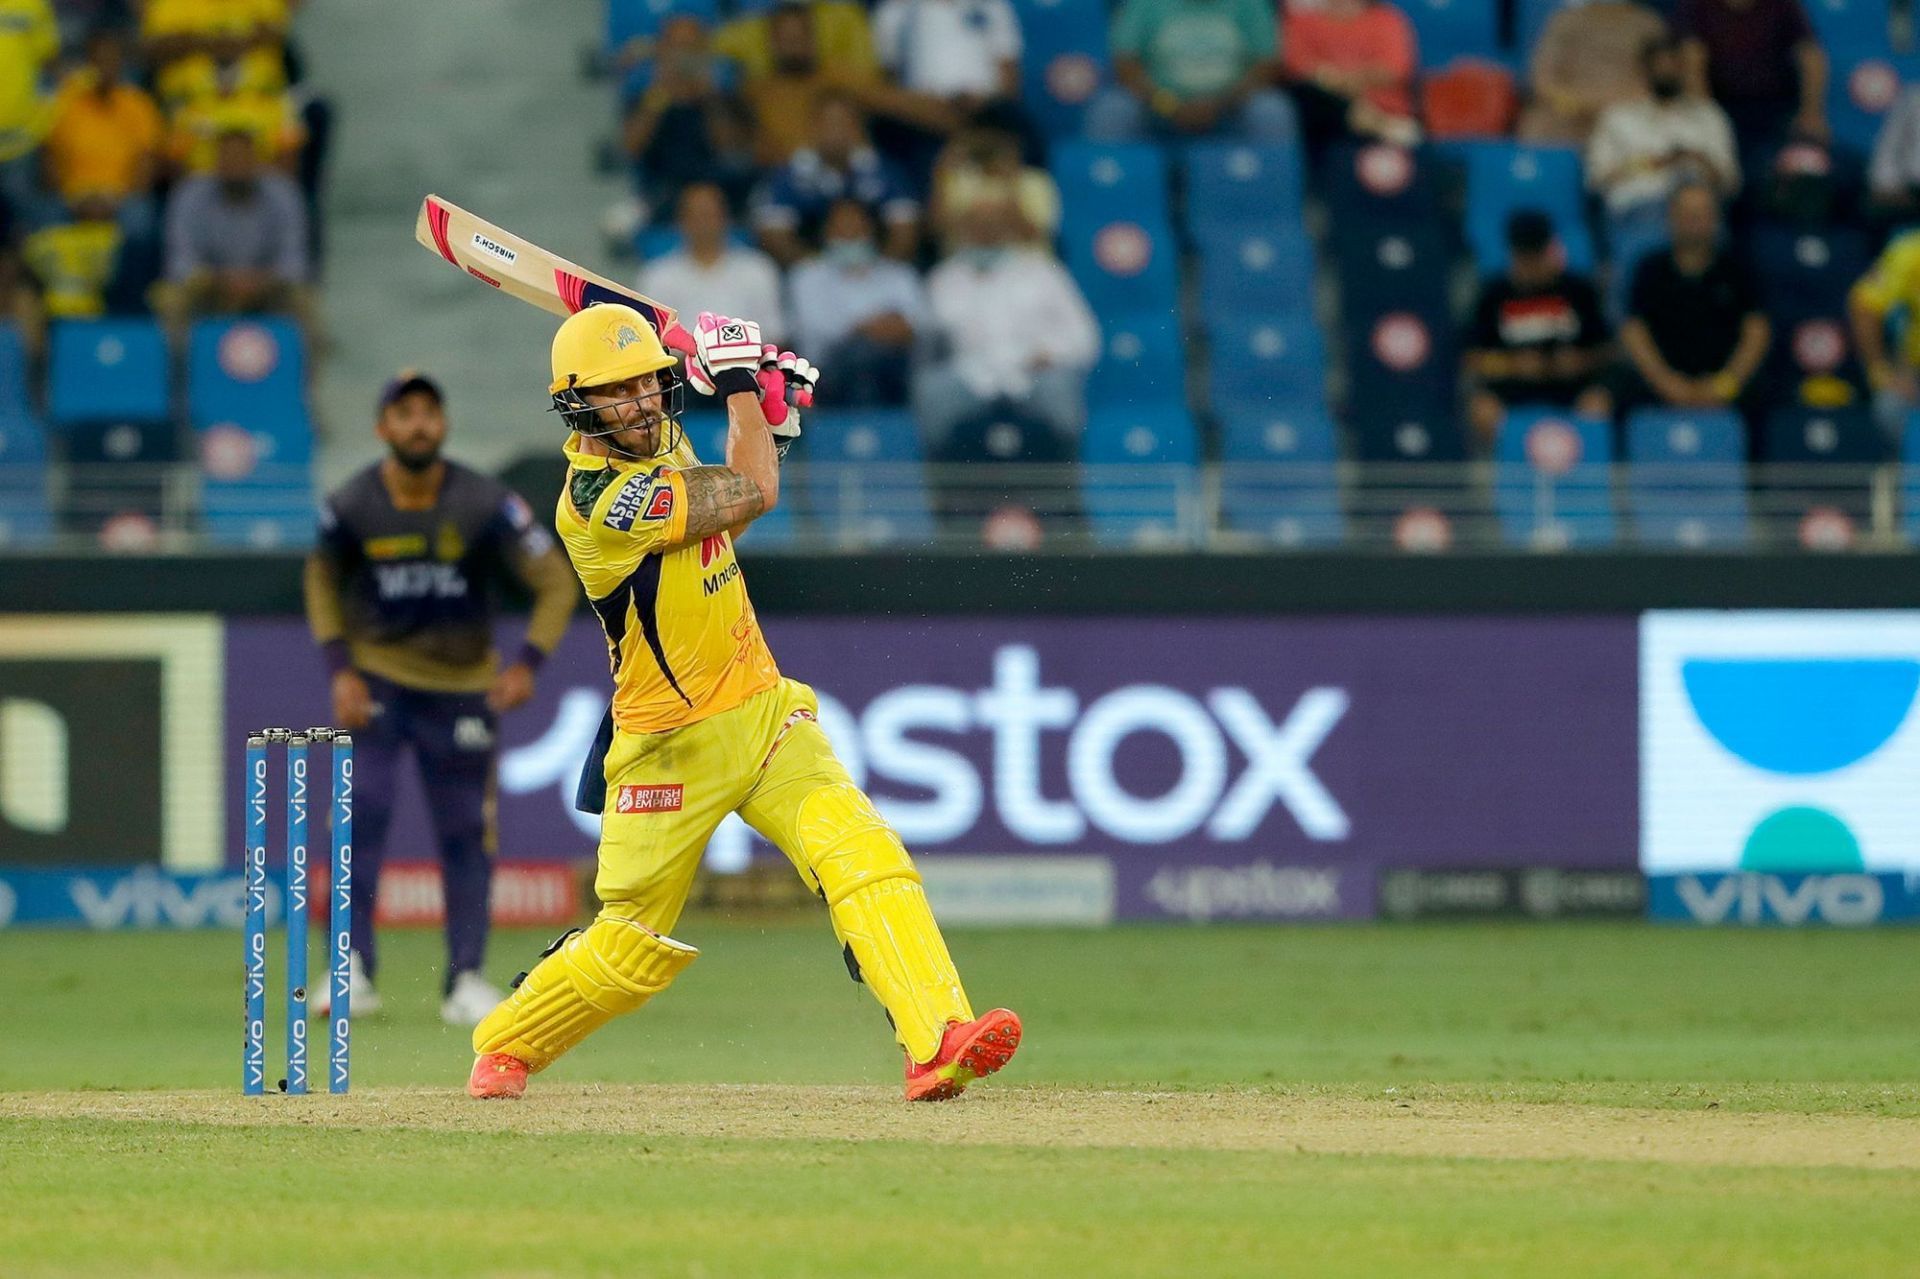 Faf du Plessis played a crucial role for CSK in the final and won the Player of the Match award